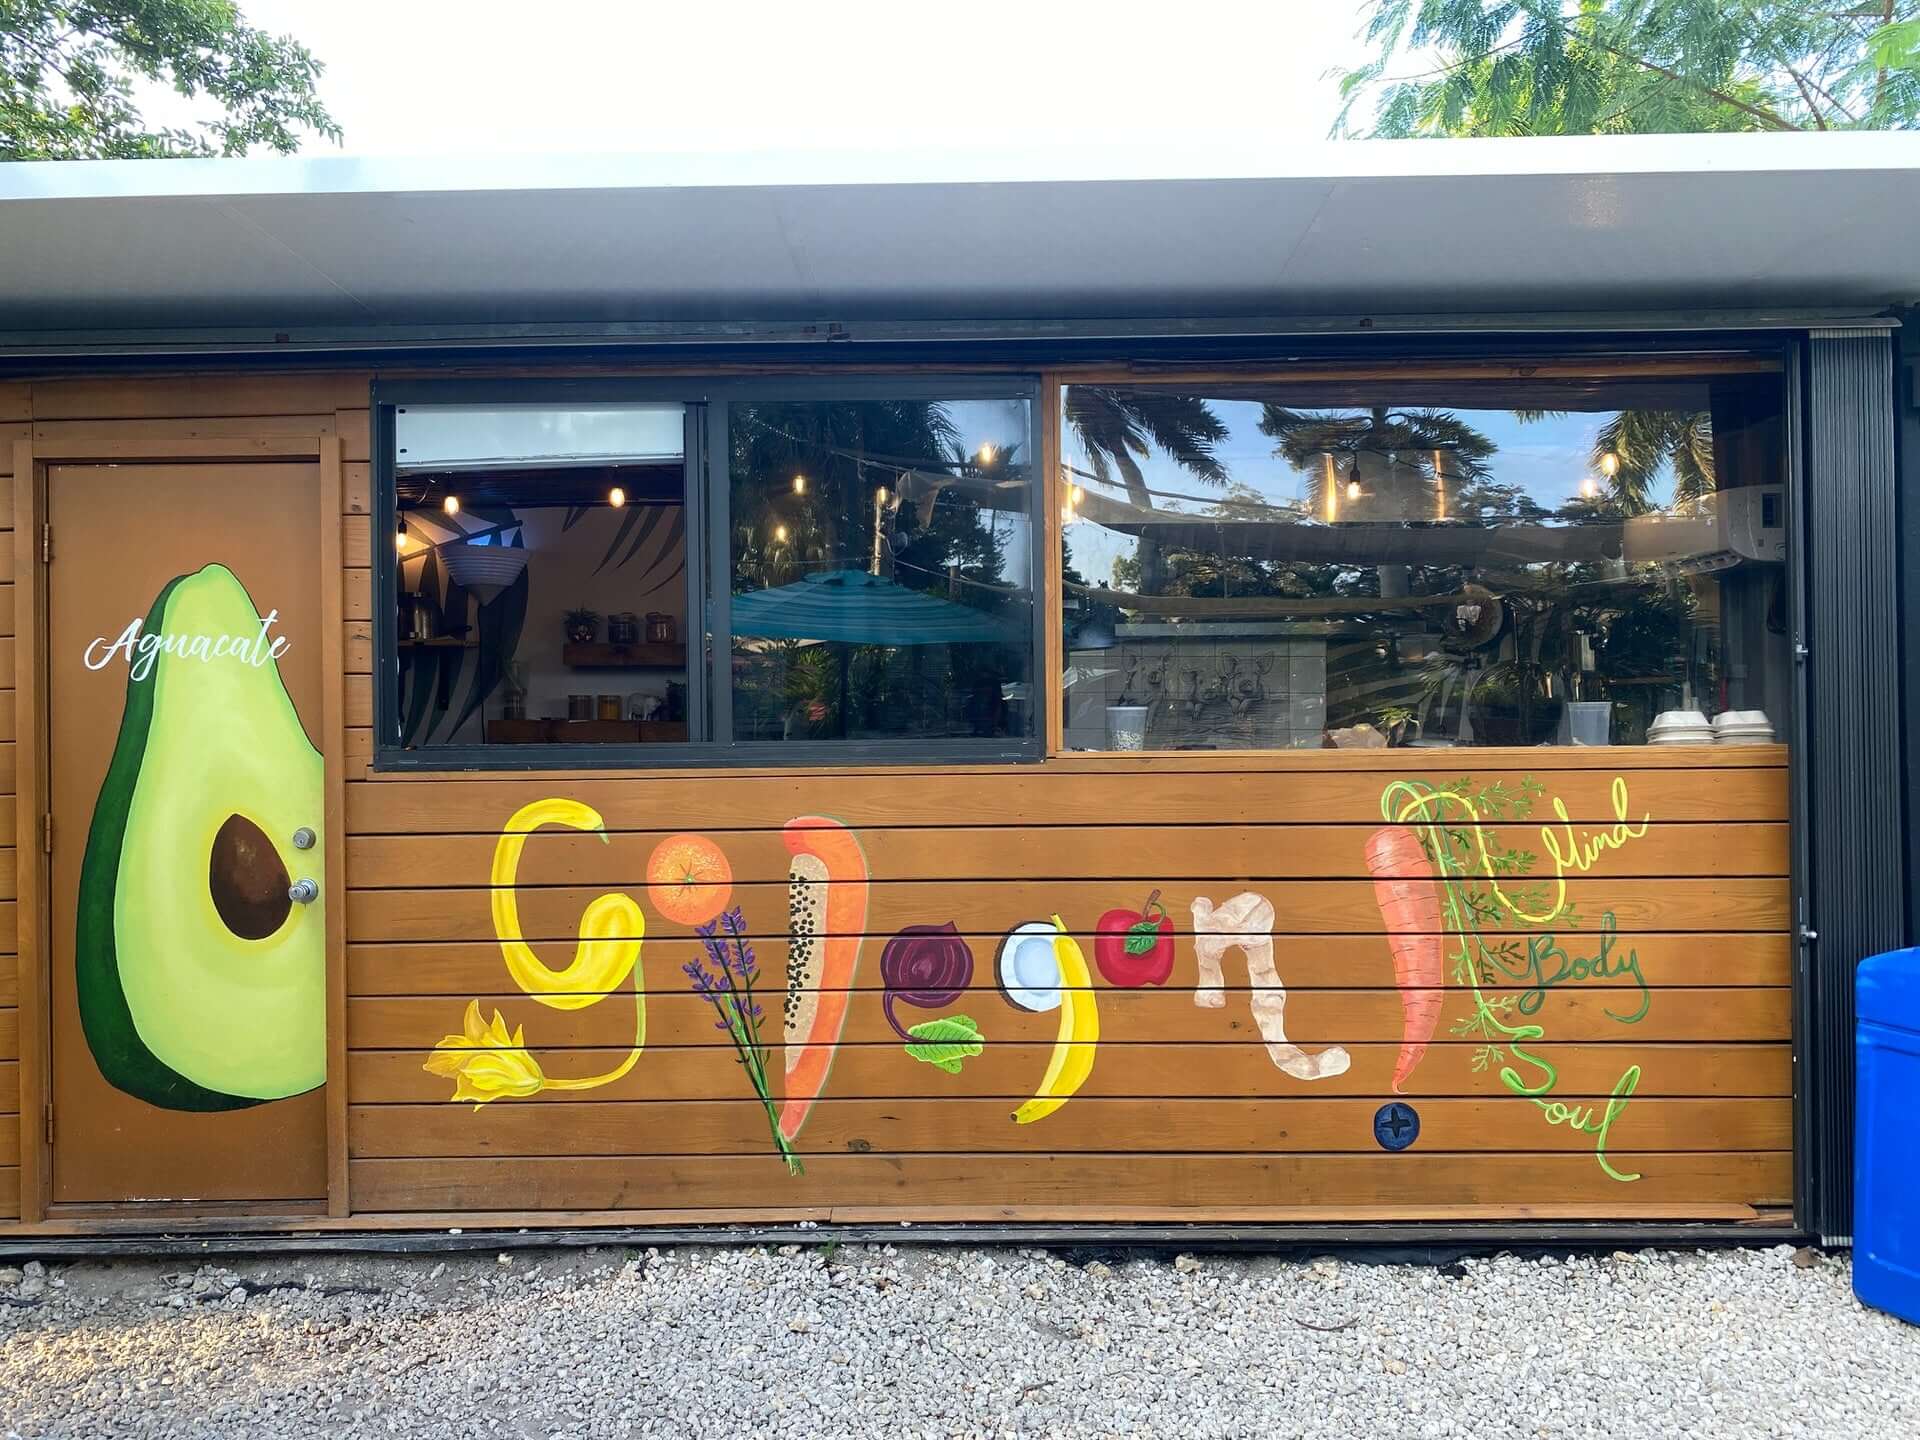 A brown paneled wall painted to say "Go Vegan." the words are assembled from different vegetables and fruits.